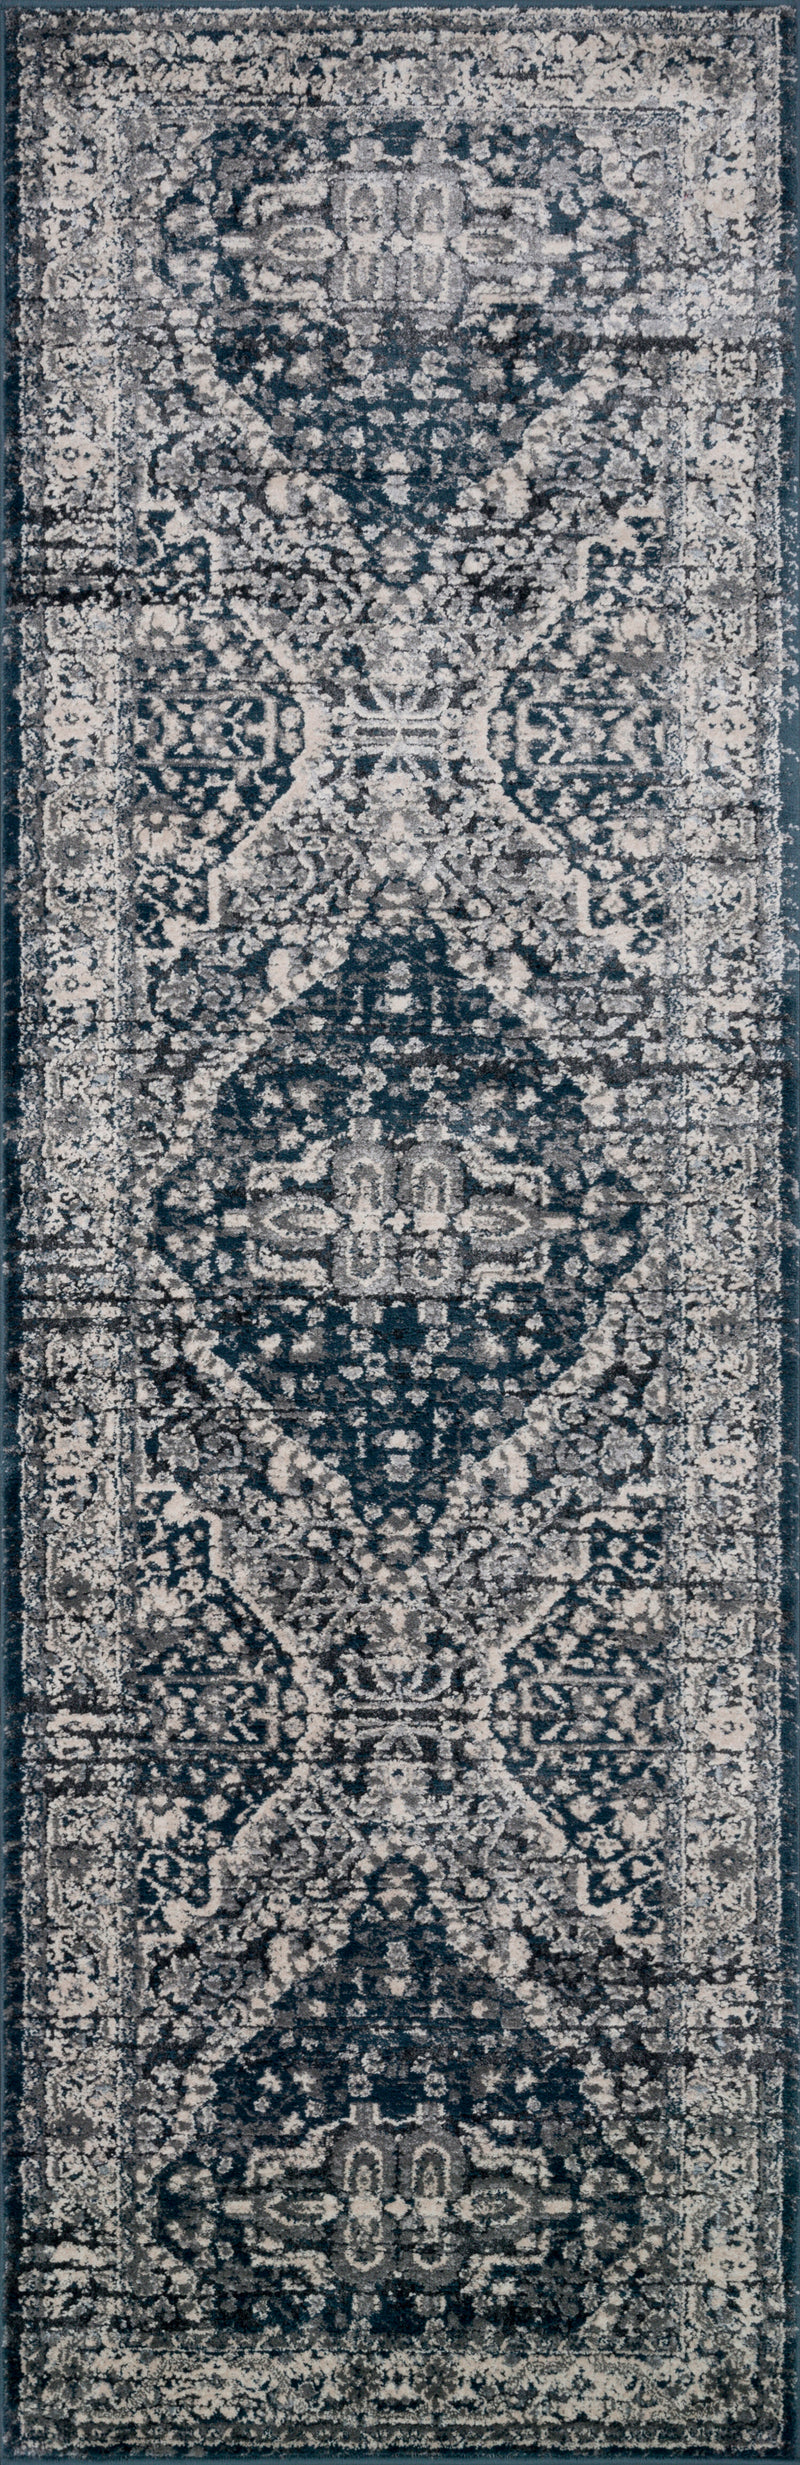 EVERLY Collection Wool/Viscose Rug in GREY / MIDNIGHT Gray Accent Power-Loomed Wool/Viscose